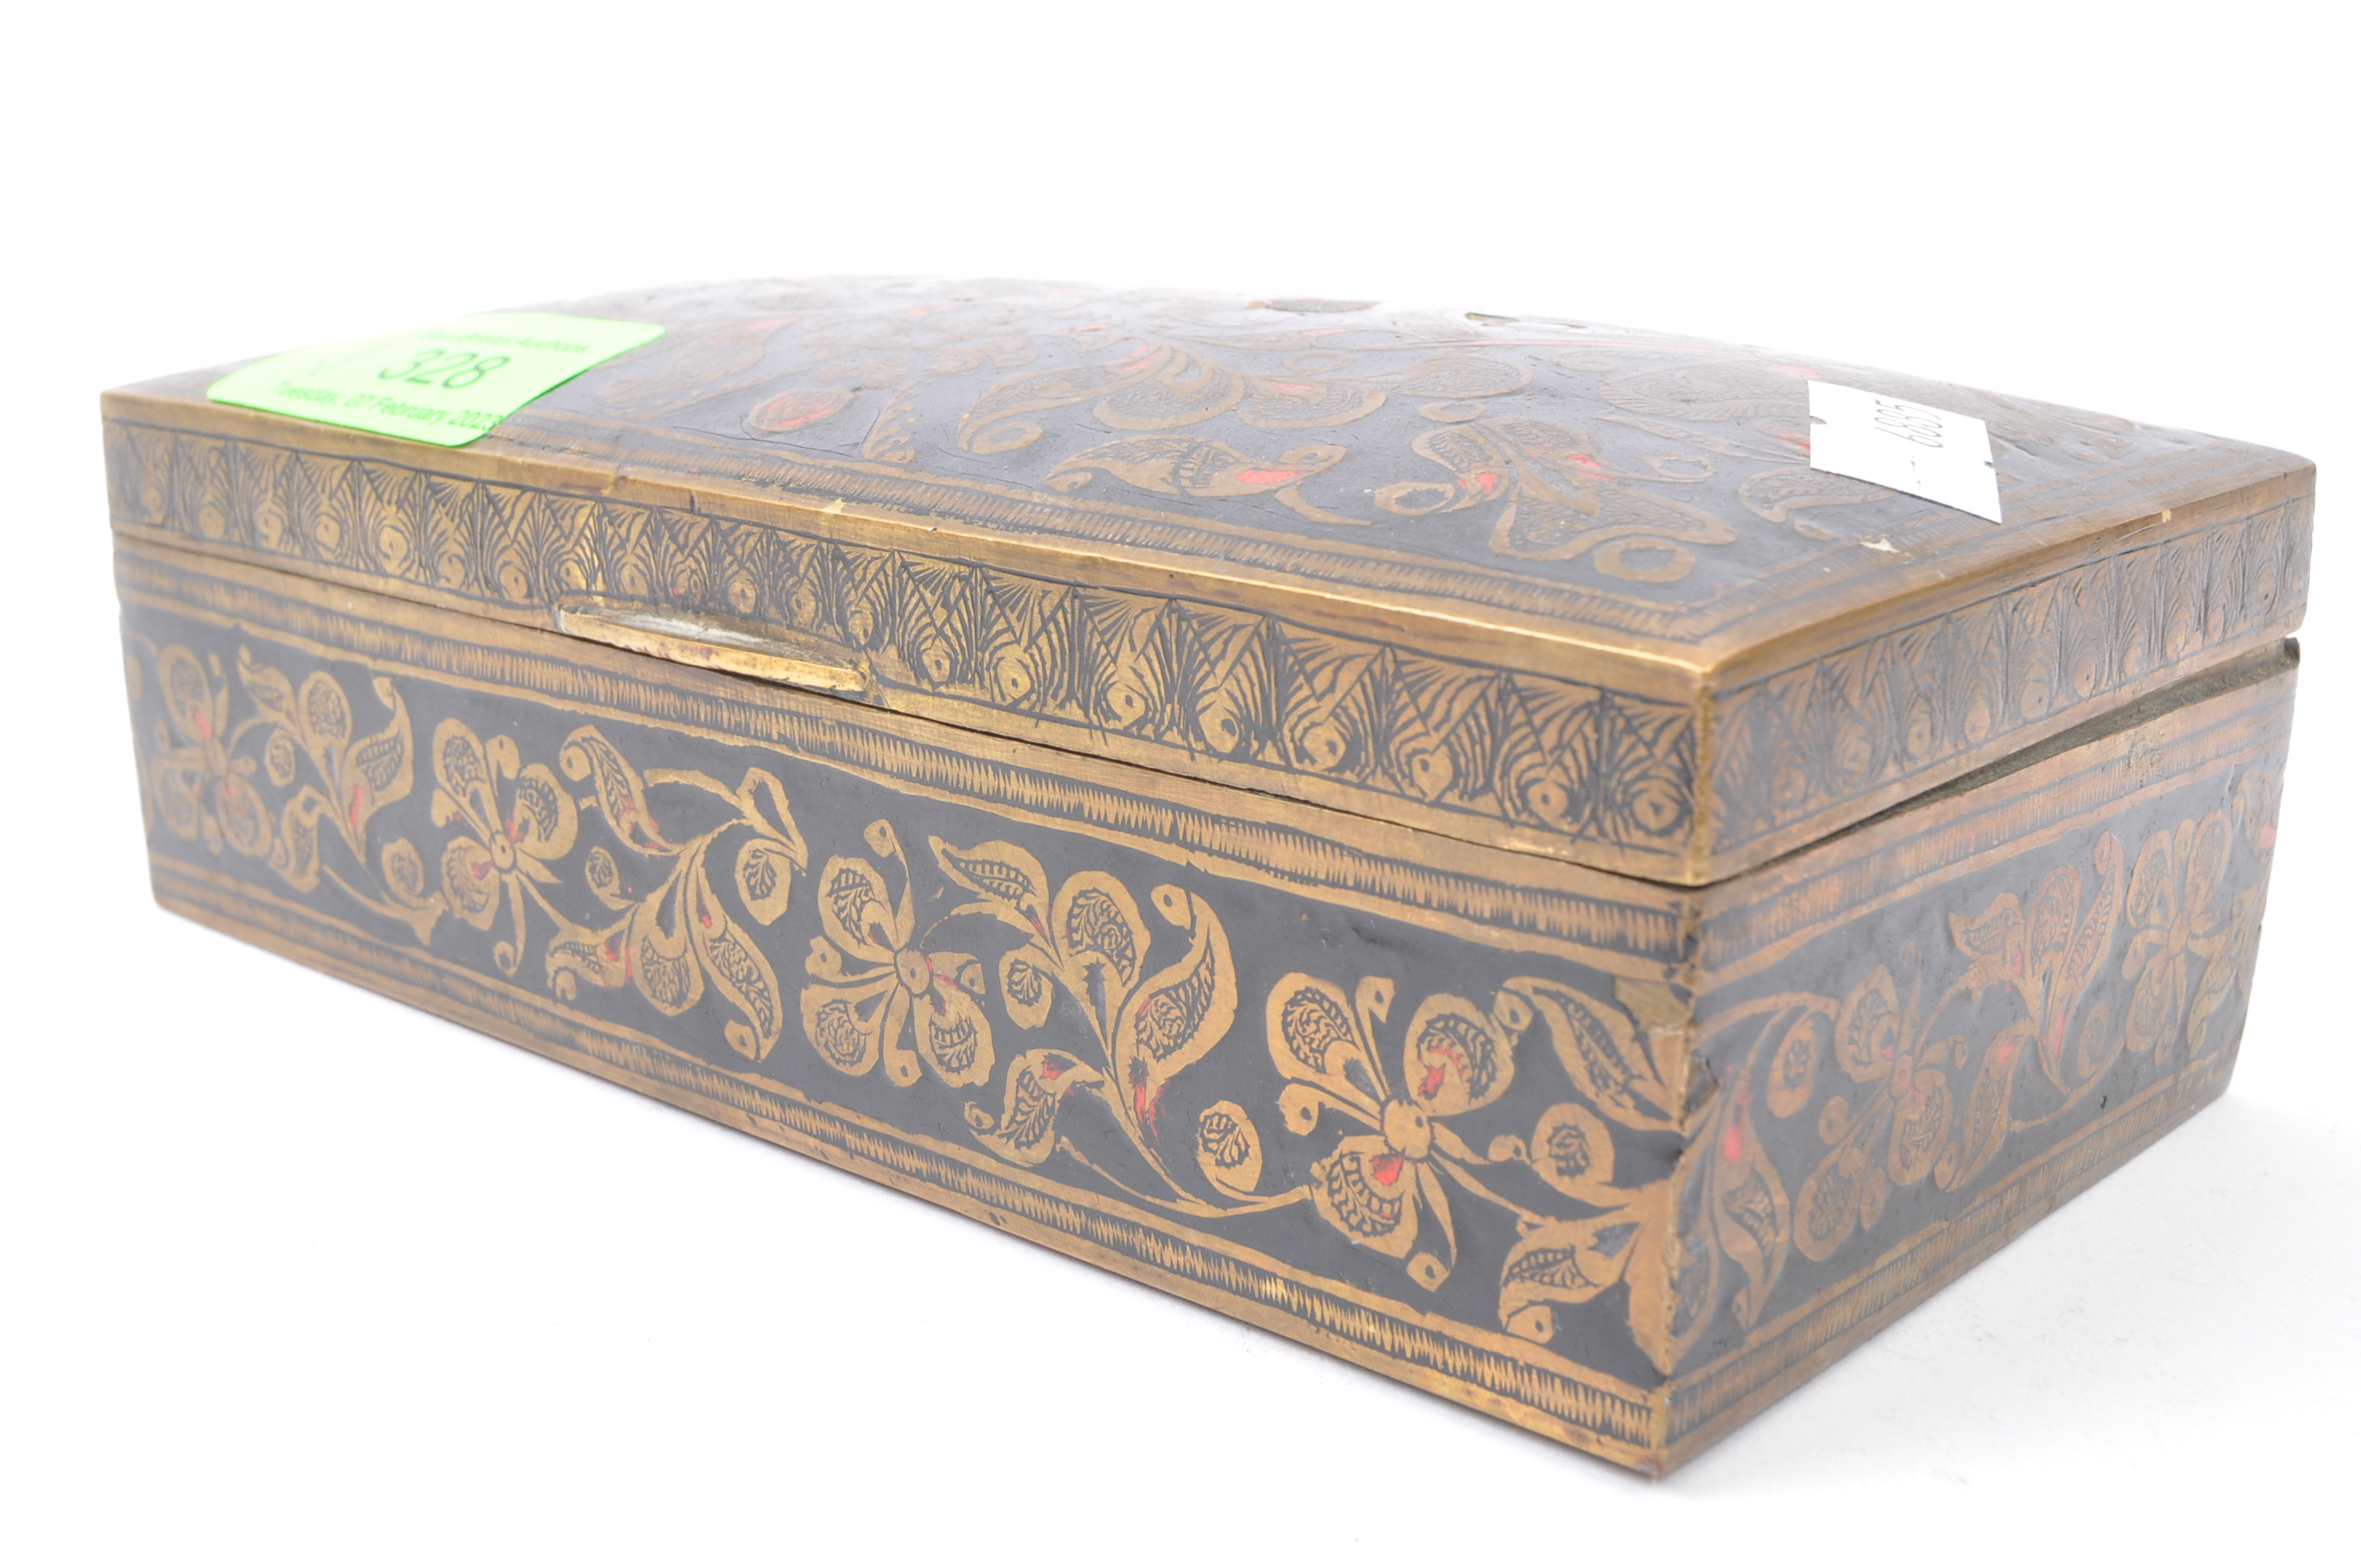 EARLY 20TH CENTURY PERSIAN ISLAMIC INLAID CIGARETTE BOX - Image 2 of 5